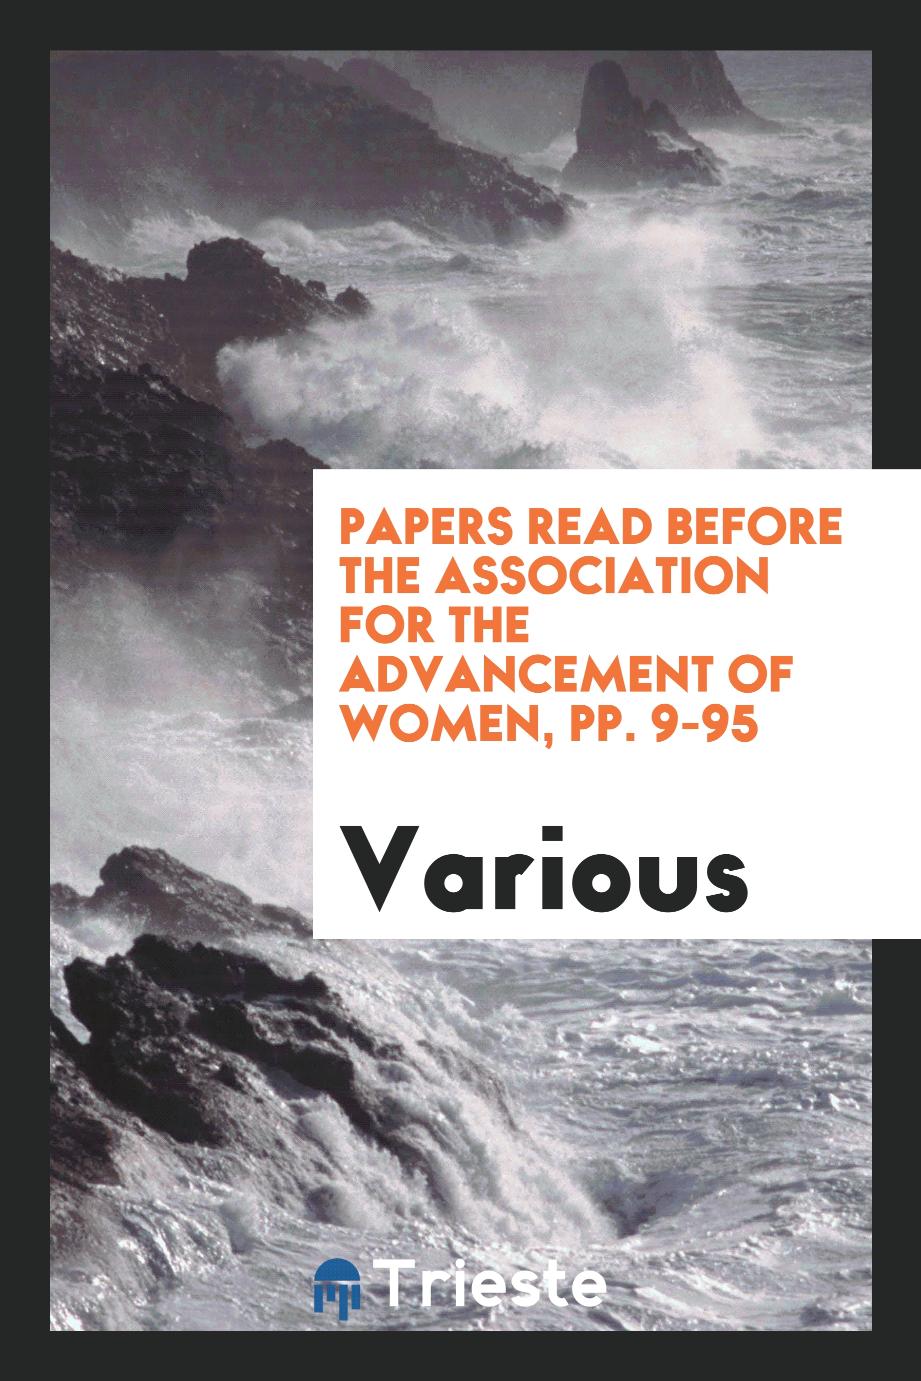 Papers Read Before the Association for the Advancement of Women, pp. 9-95